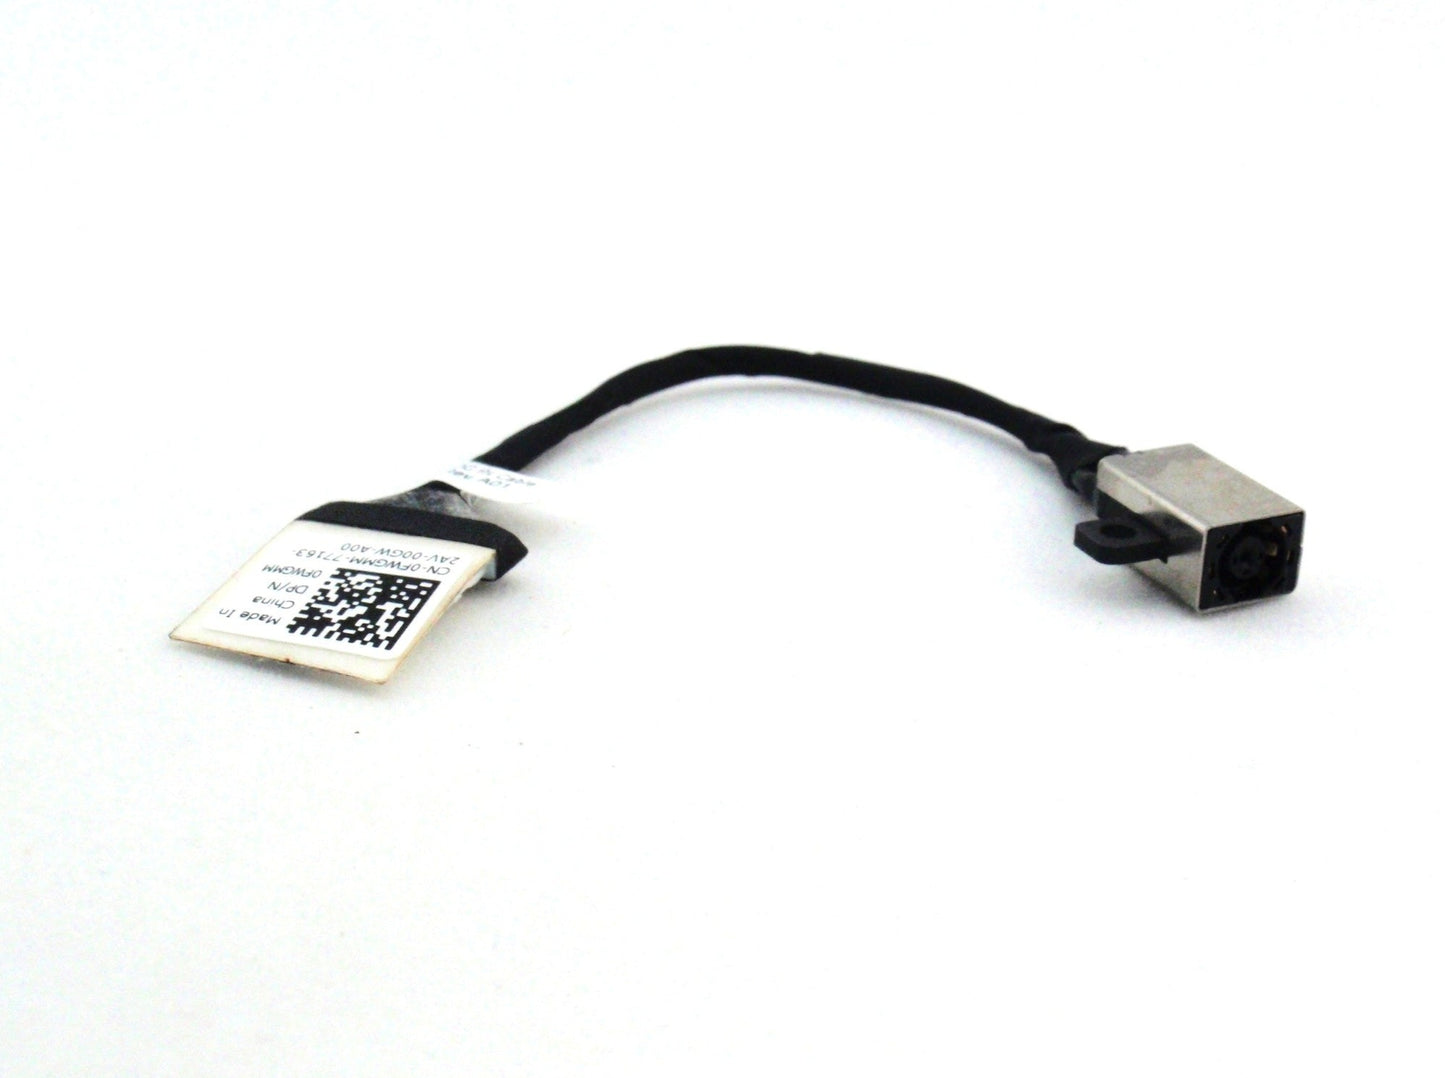 Dell 0FWGMM New DC In Power Jack Charging Port Cable Inspiron 14 3000 3462 3465 3467 3476 3567 15 3000 3458 3459 3468 3565 3567 FWGMM